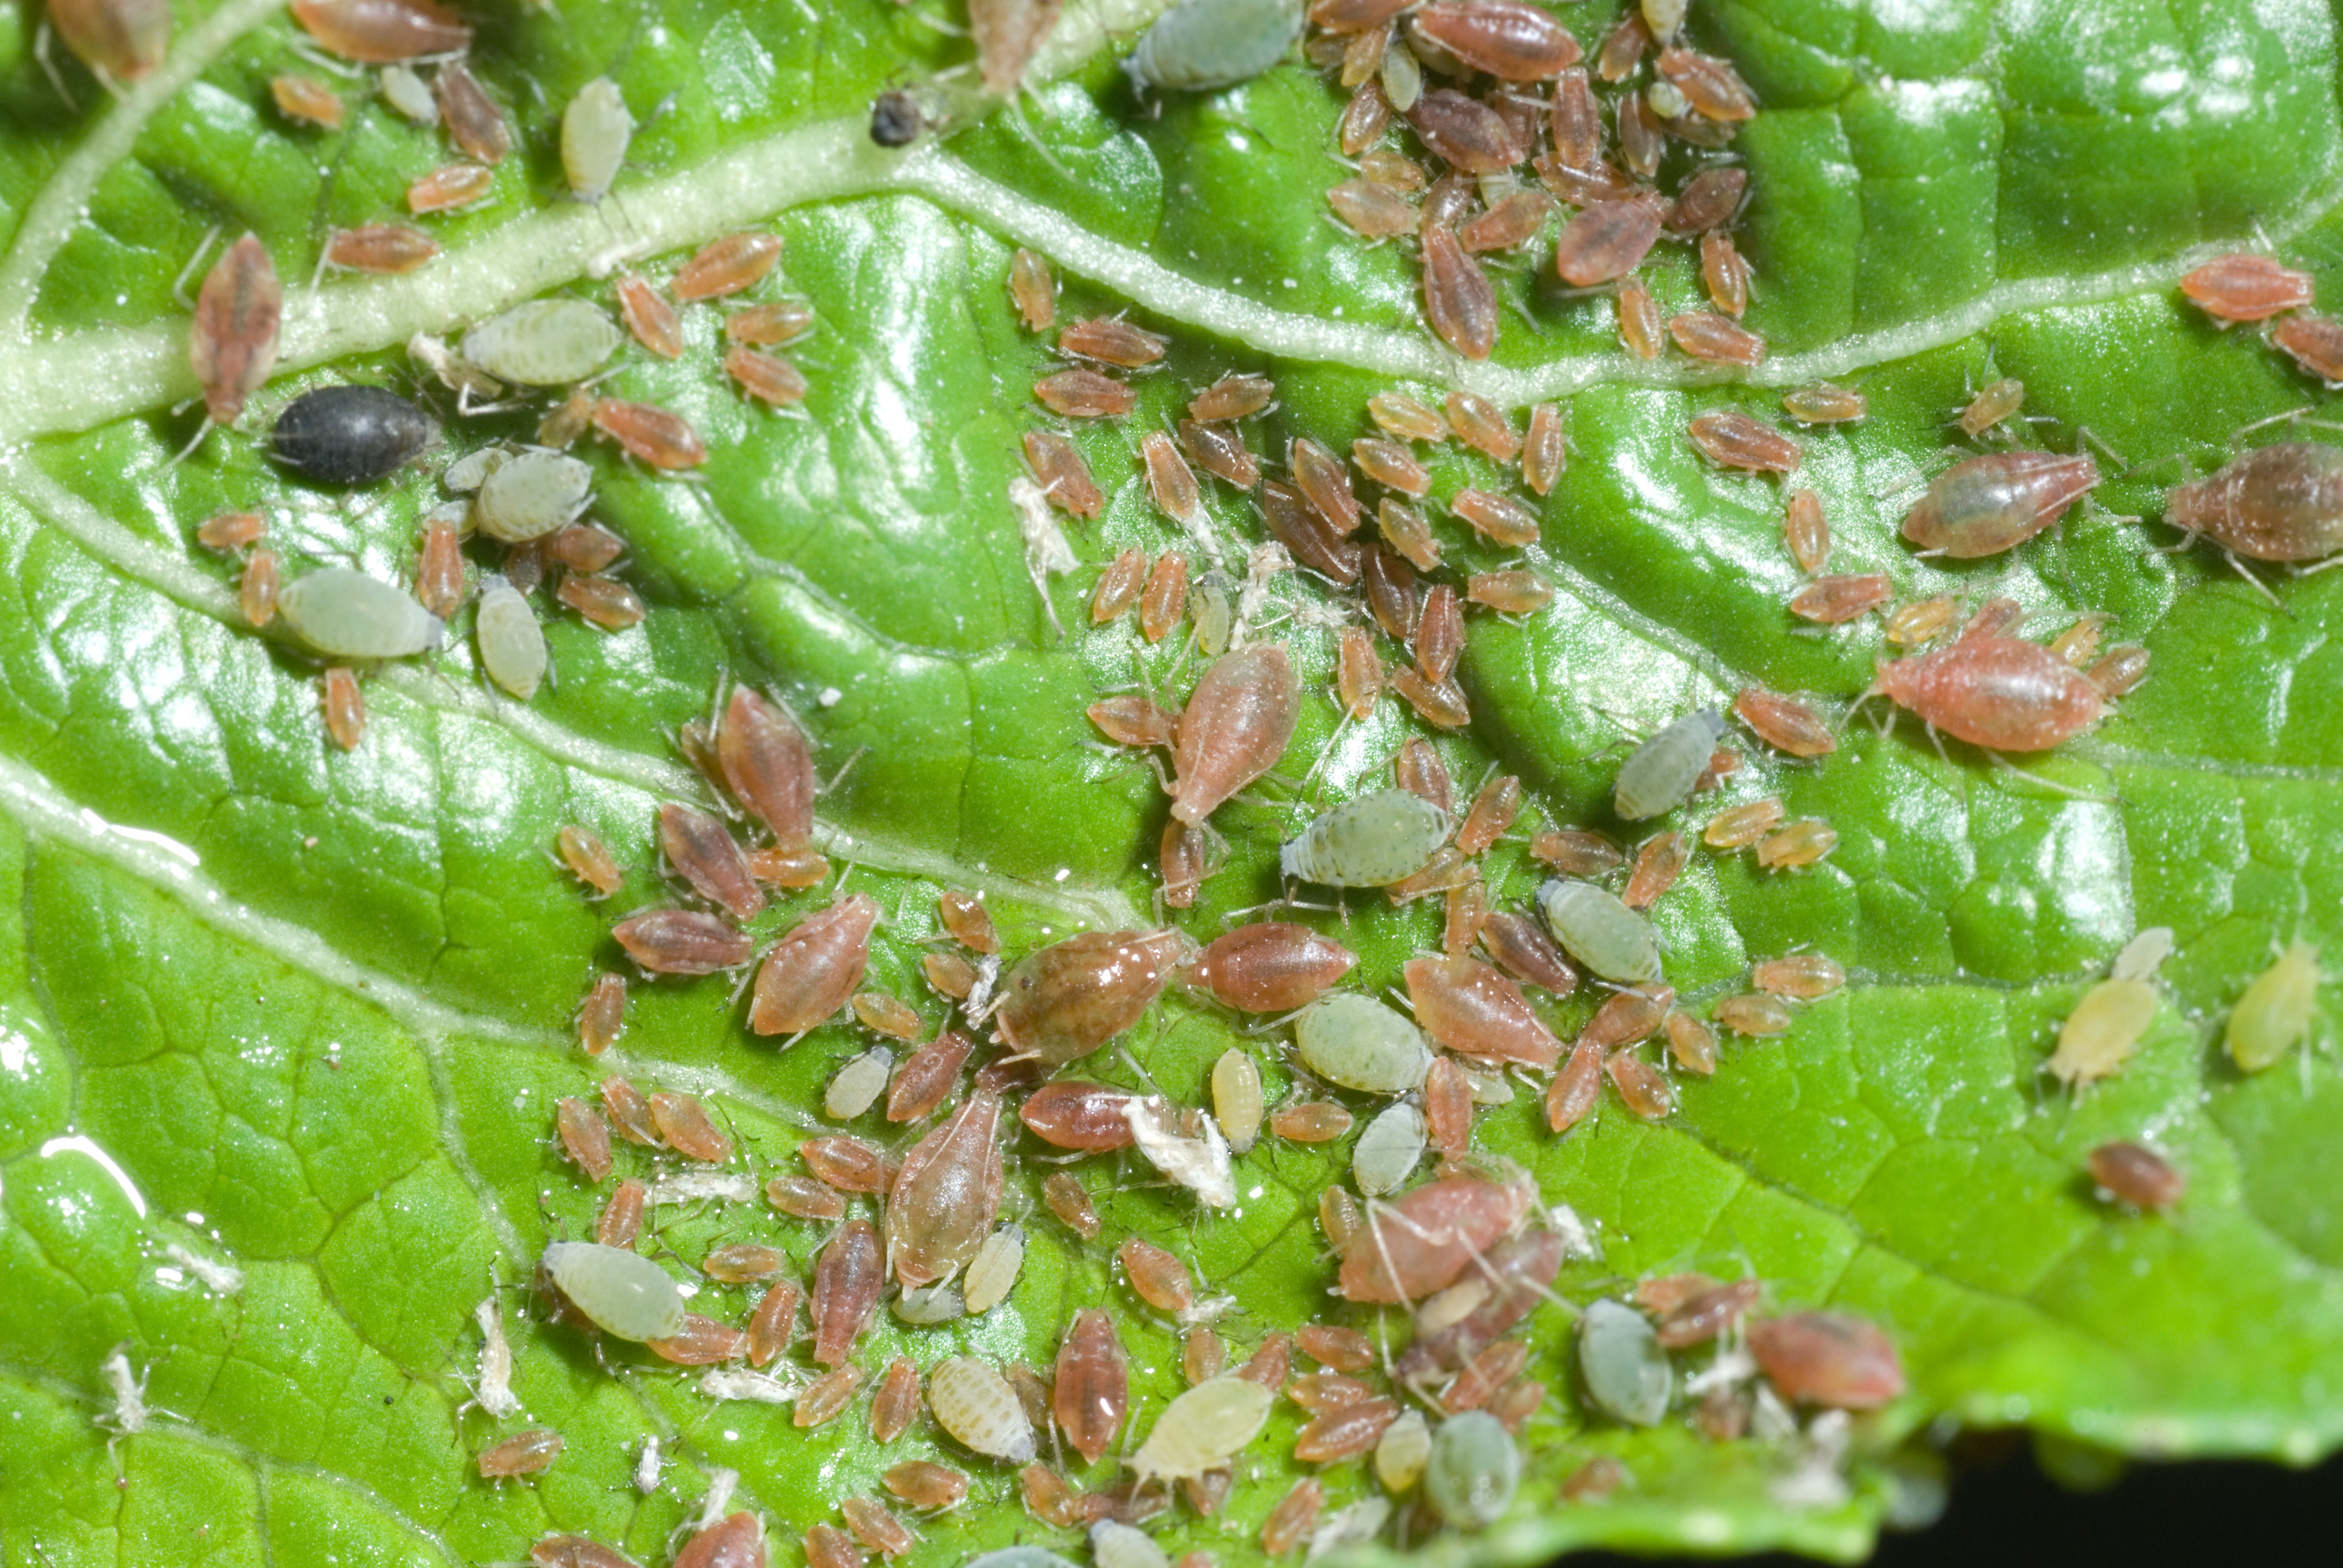 Green peach aphids.